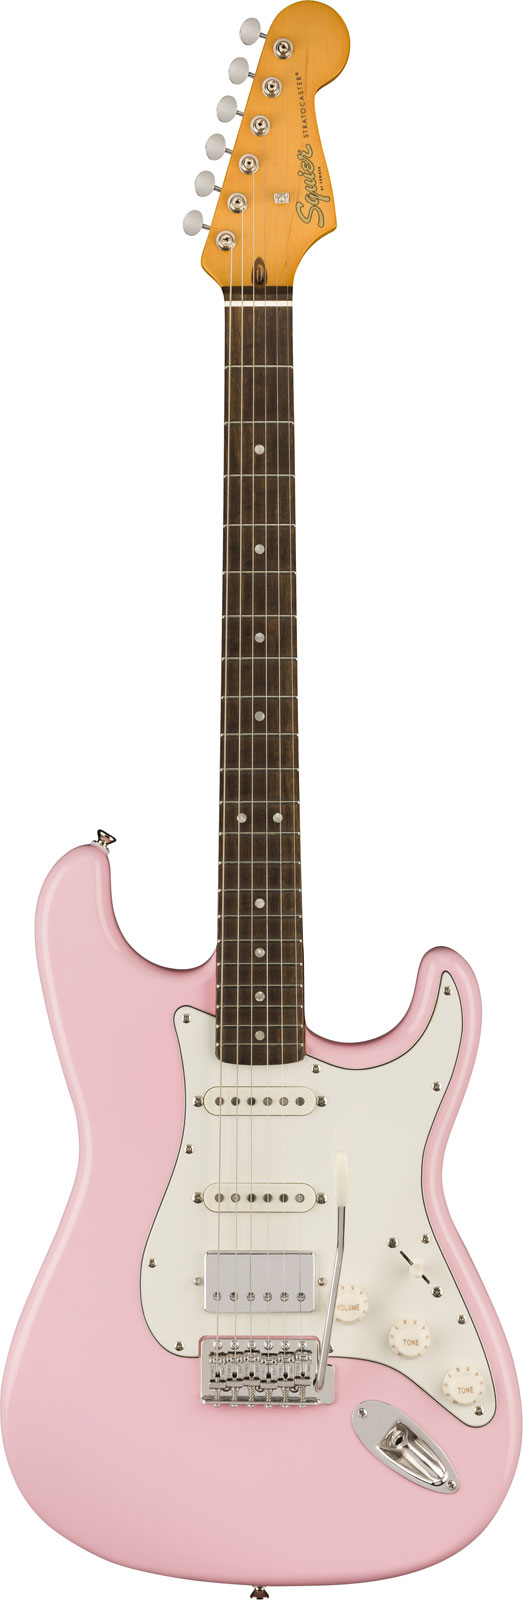 SQUIER STRATOCASTER HSS '60S CLASSIC VIBE FSR LRL SHELL PINK